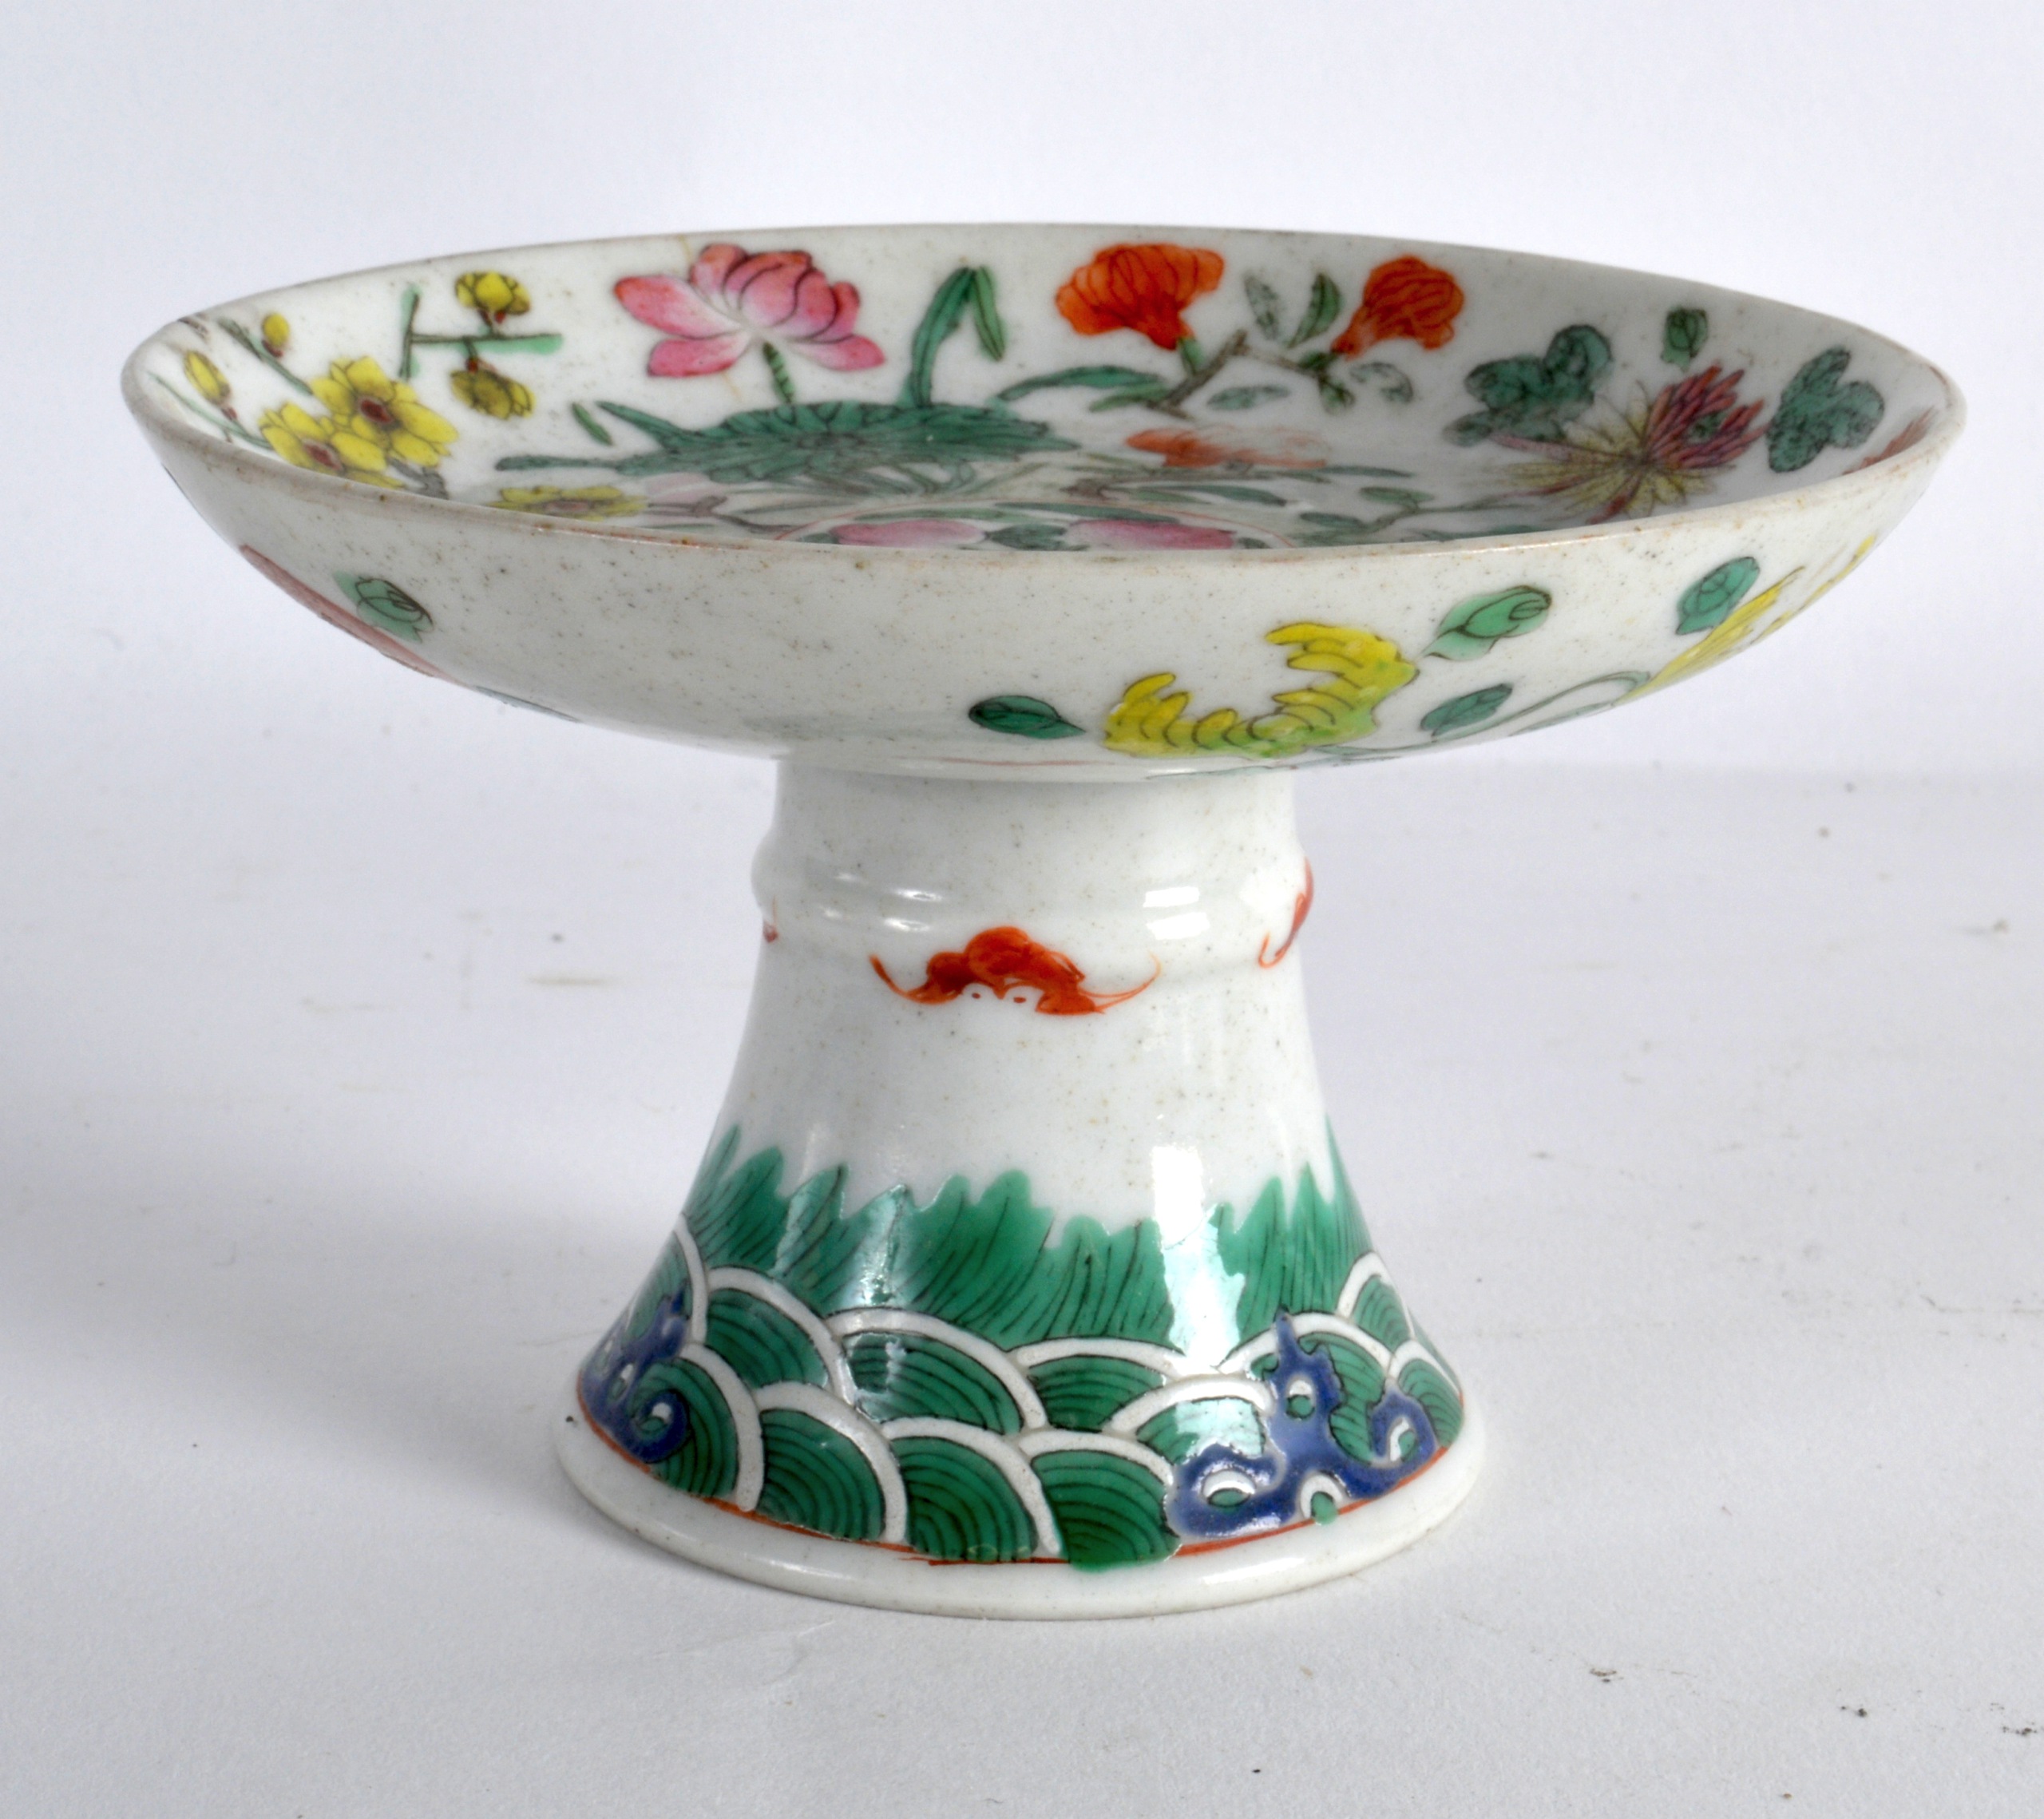 A 19TH CENTURY CHINESE FAMILLE ROSE PORCELAIN TAZZA painted with foliage and birds. 4.25ins